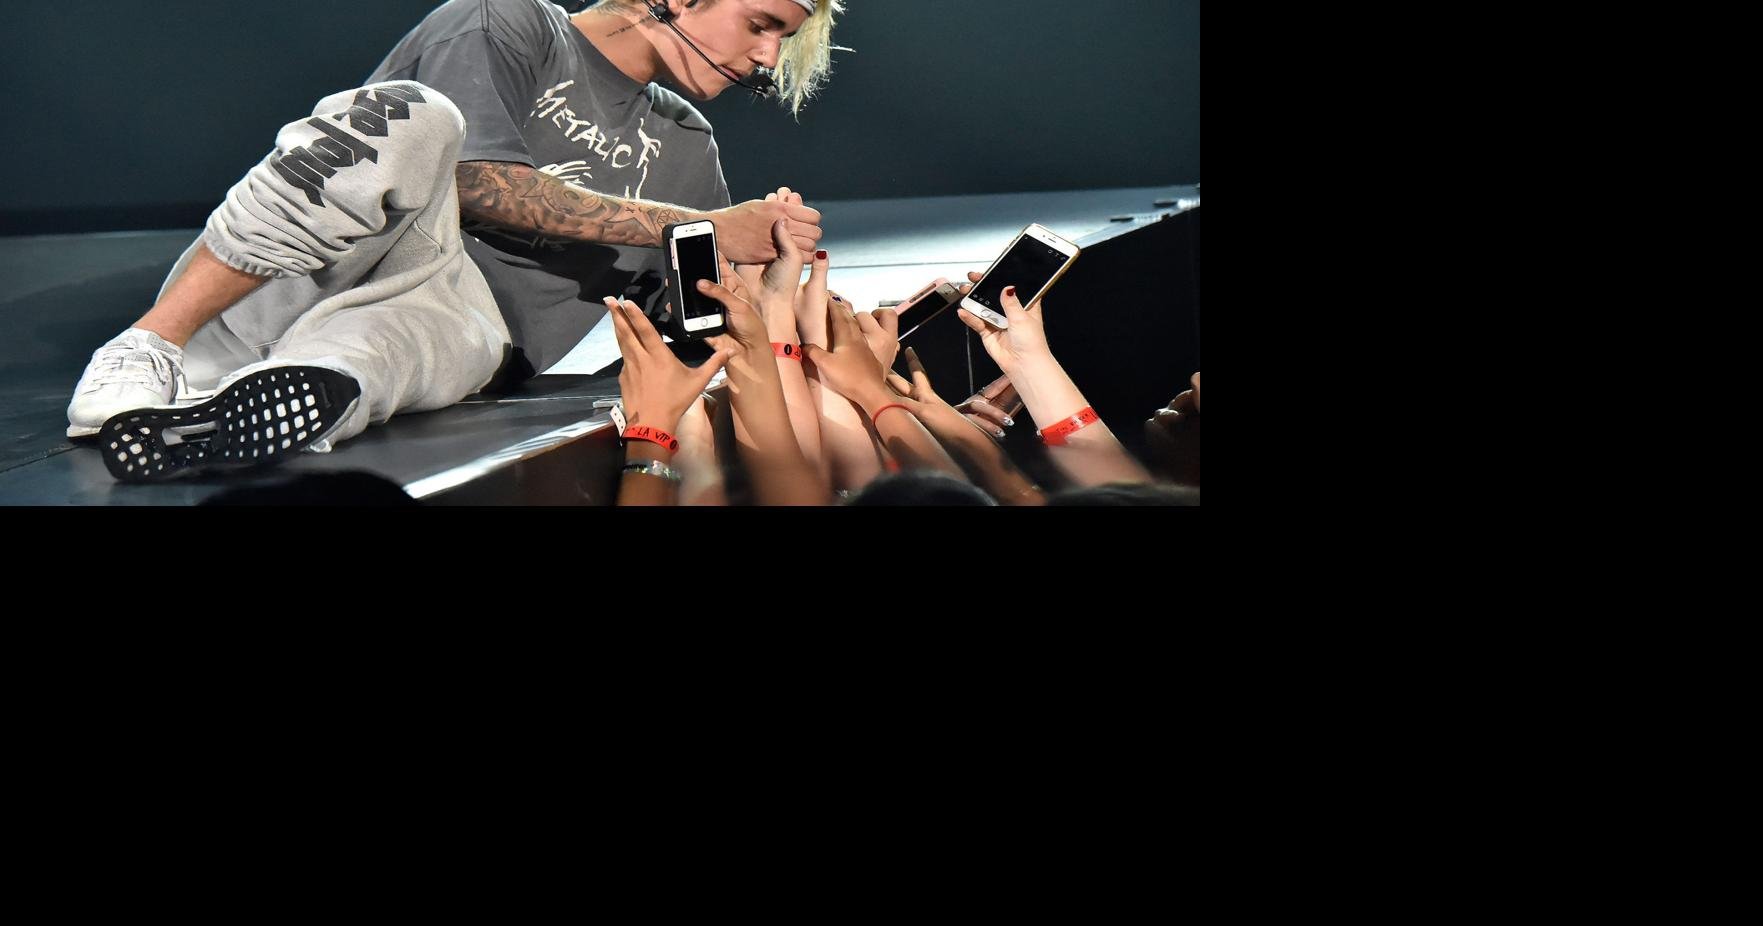 Dallas didn't get the best possible Justin Bieber at his Sunday concert